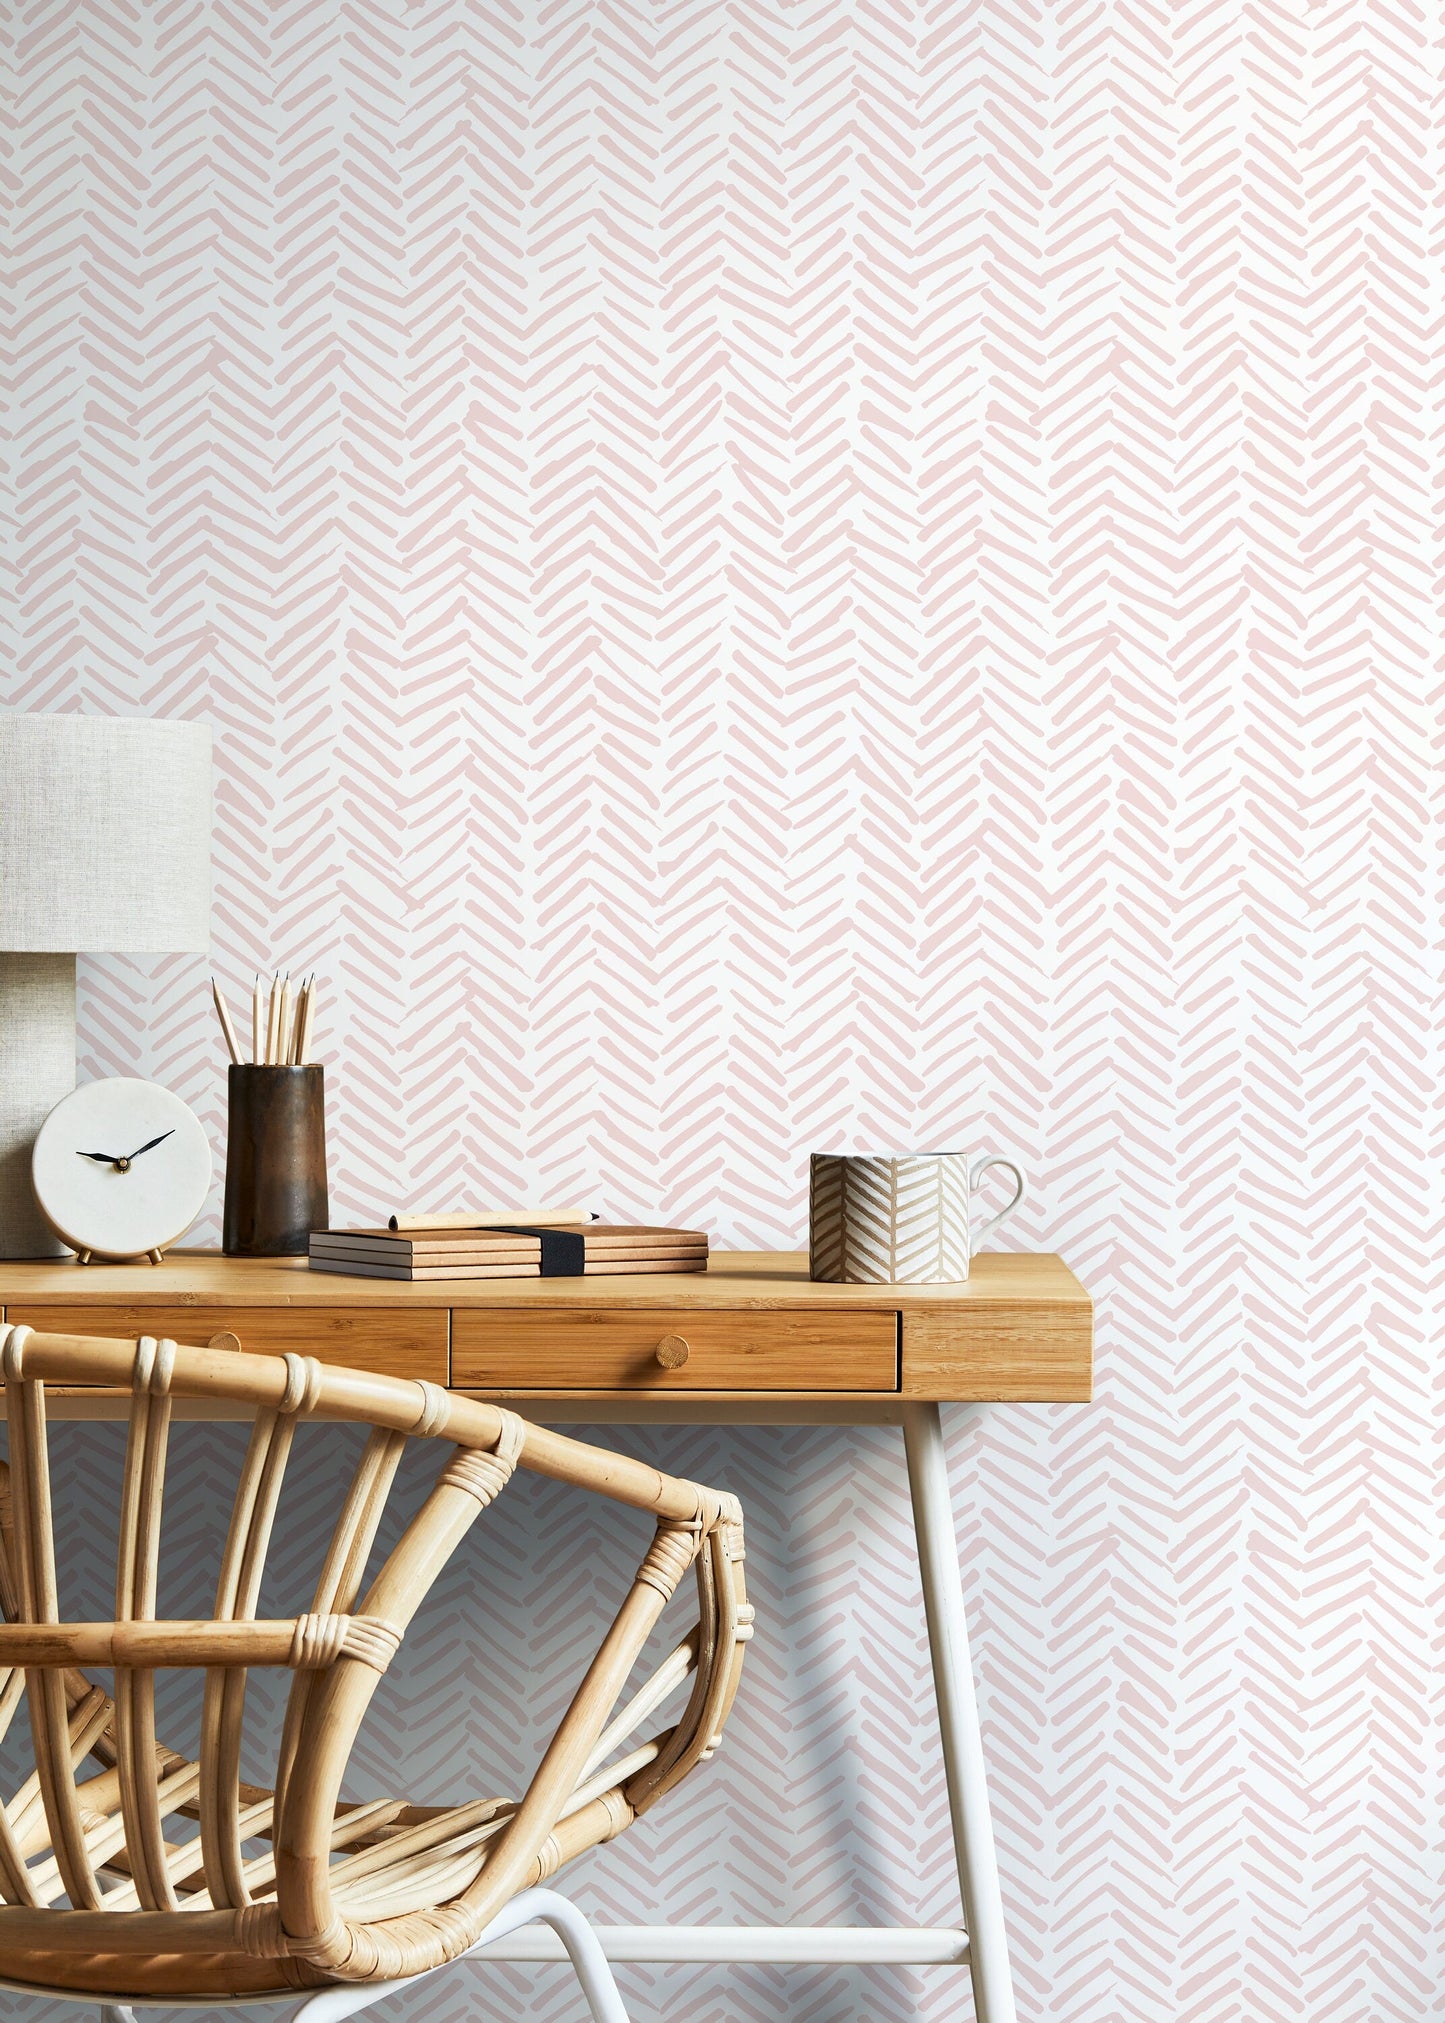 Boho Herringbone in Soft Pink Wallpaper Removable and Repositionable Peel and Stick or Traditional Pre-pasted Wallpaper - ZADY